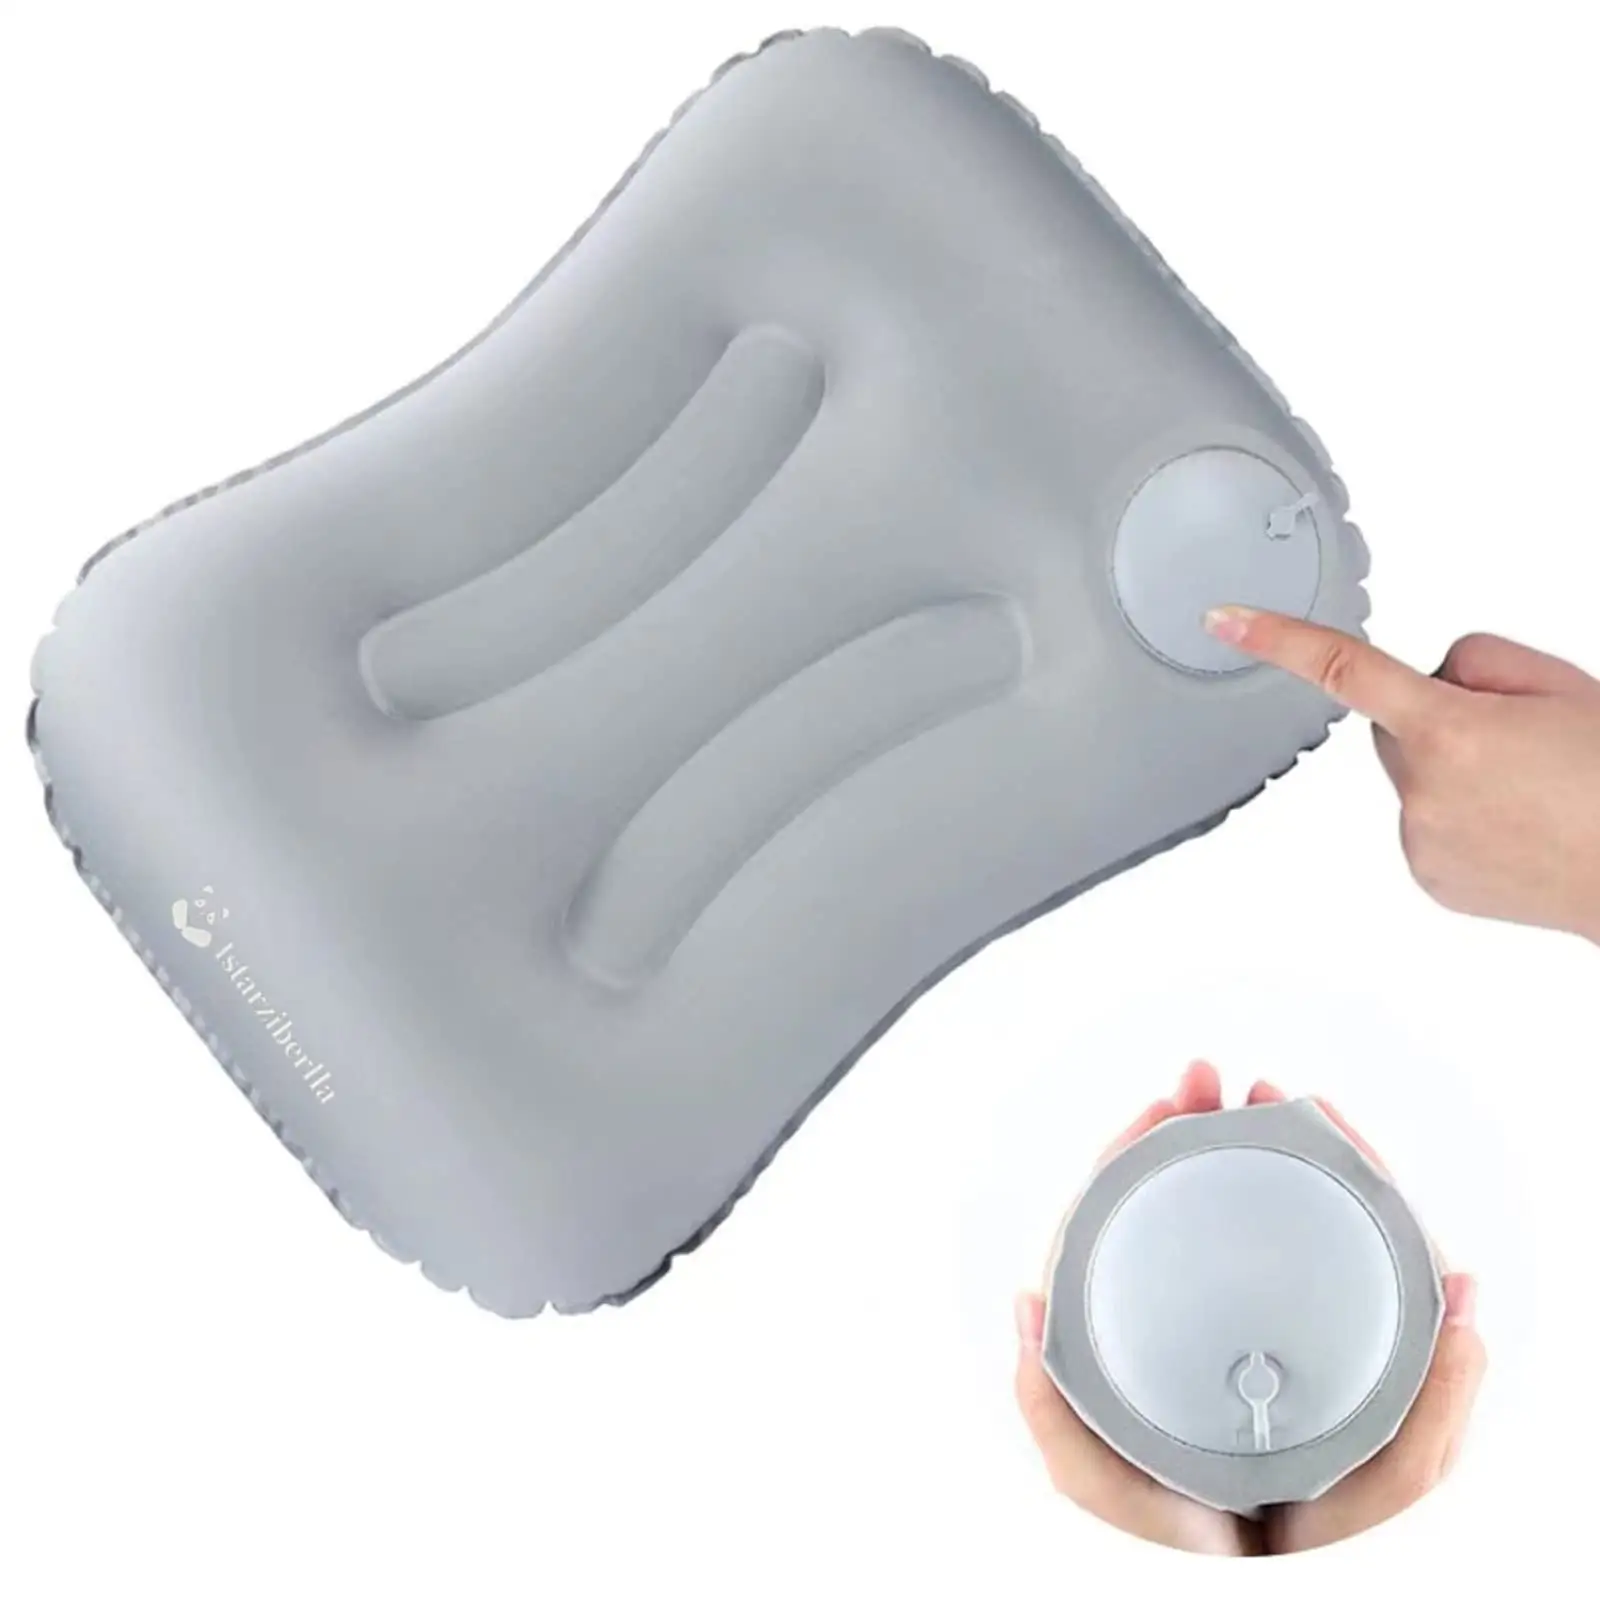 2022 Hot sell Camping Inflatable Pillow with Built-in Press Pump Ultralight Compressible Collapsible